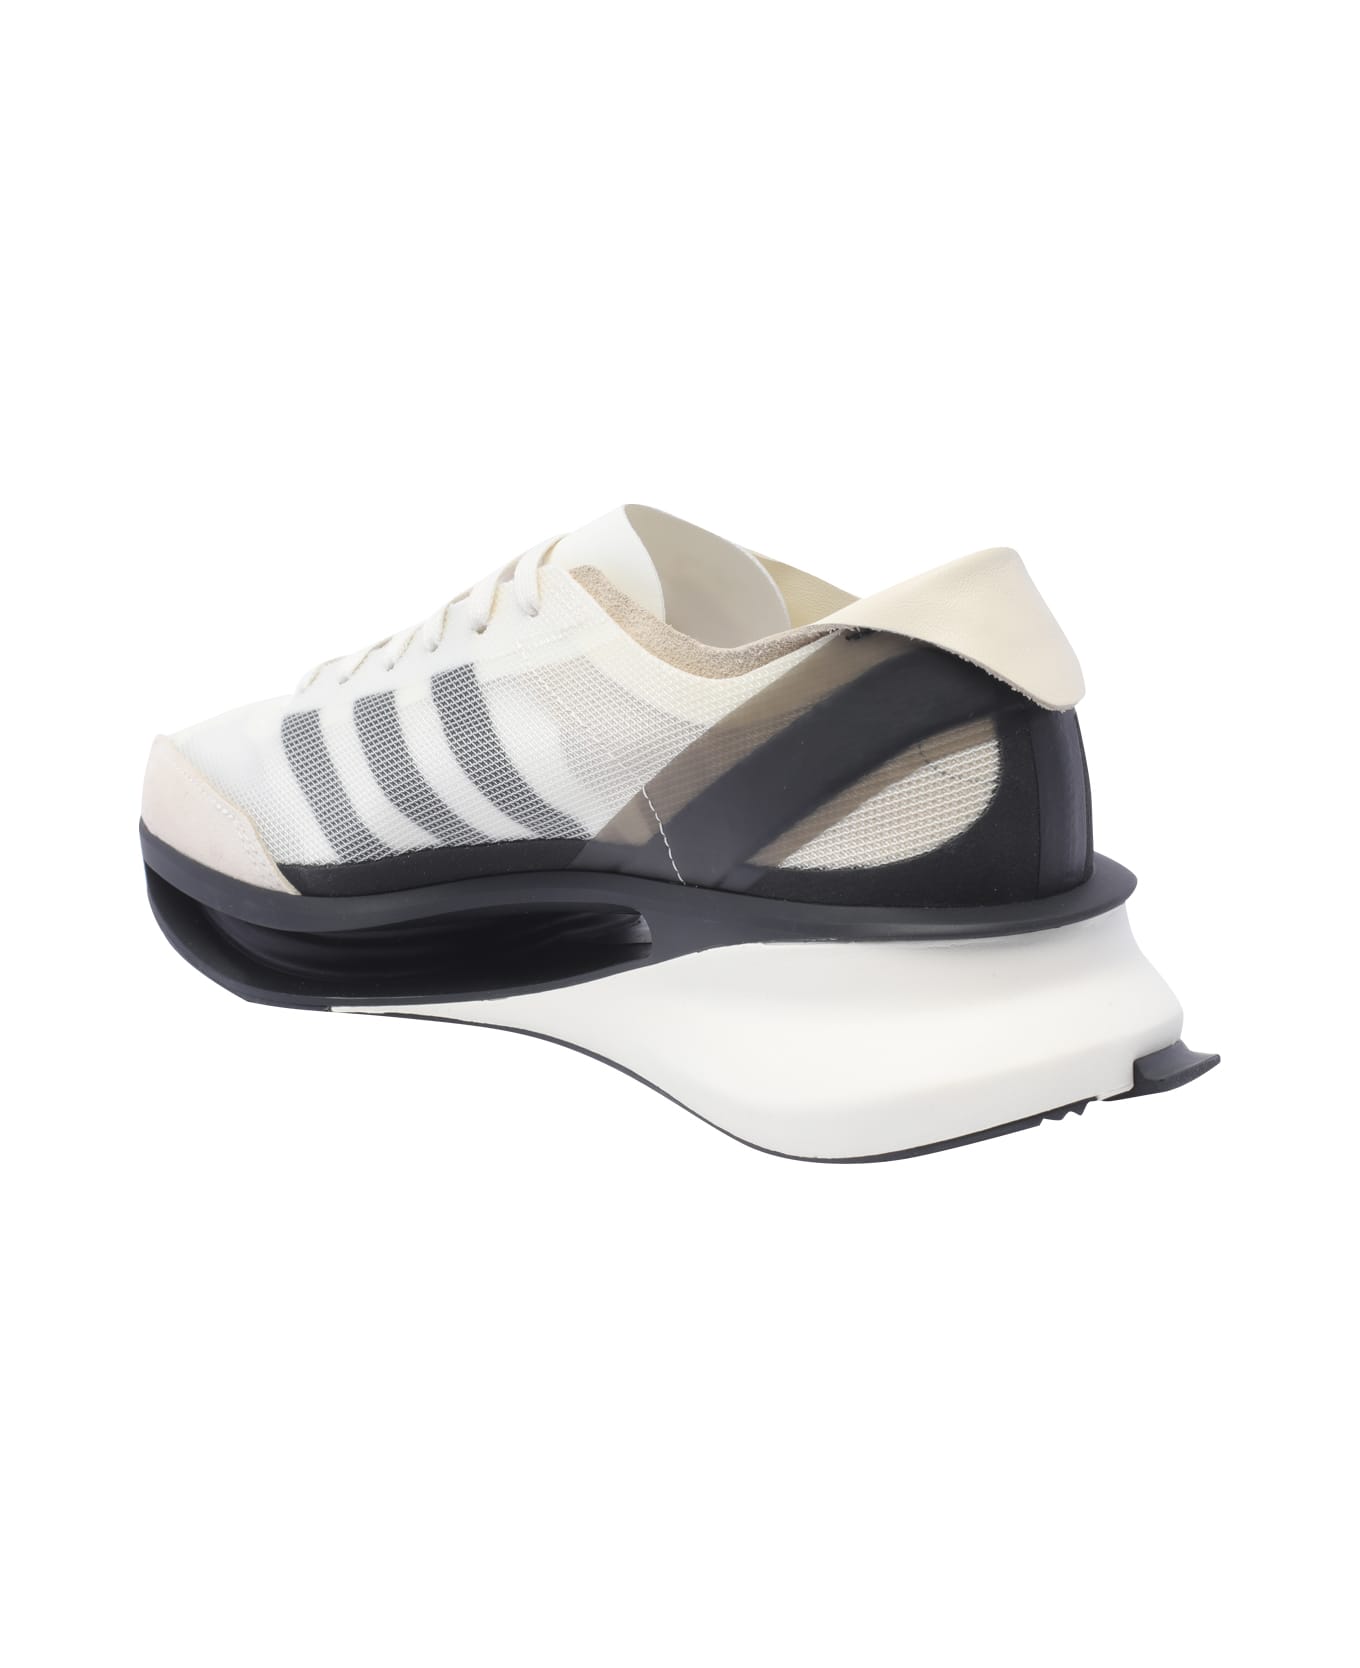 Y-3 S-gendo Sneakers - White